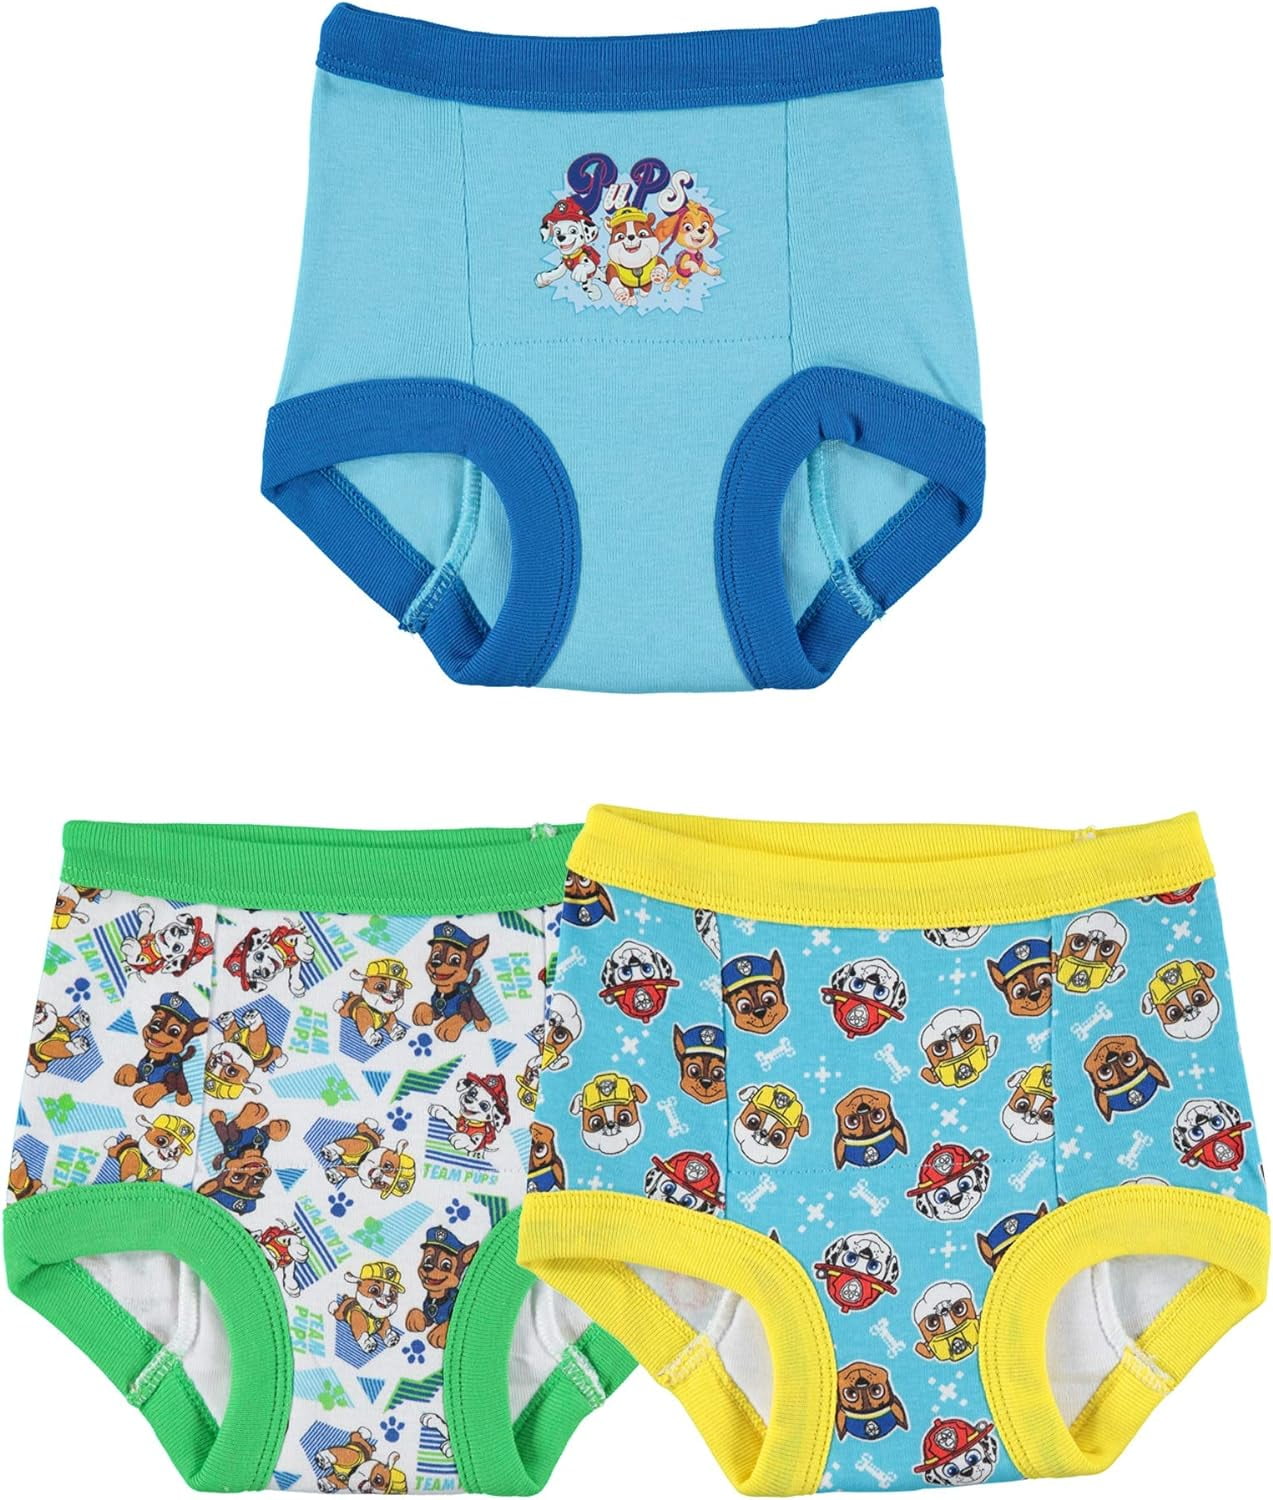 Paw Patrol Boys Toddler Potty Training Pant and Starter Kit with